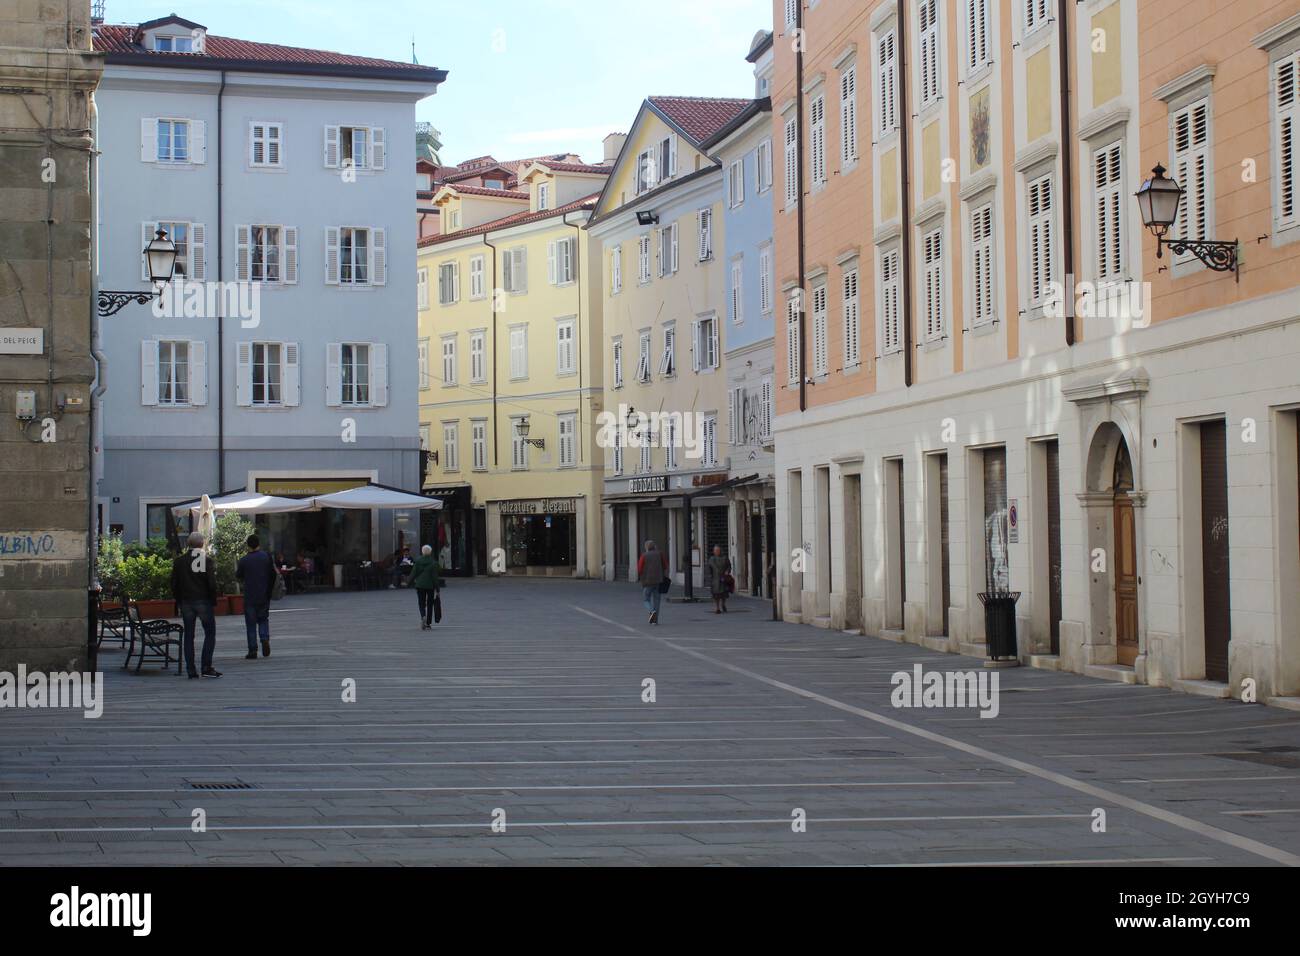 Morning on the little square in Italian city of Trieste Stock Photo